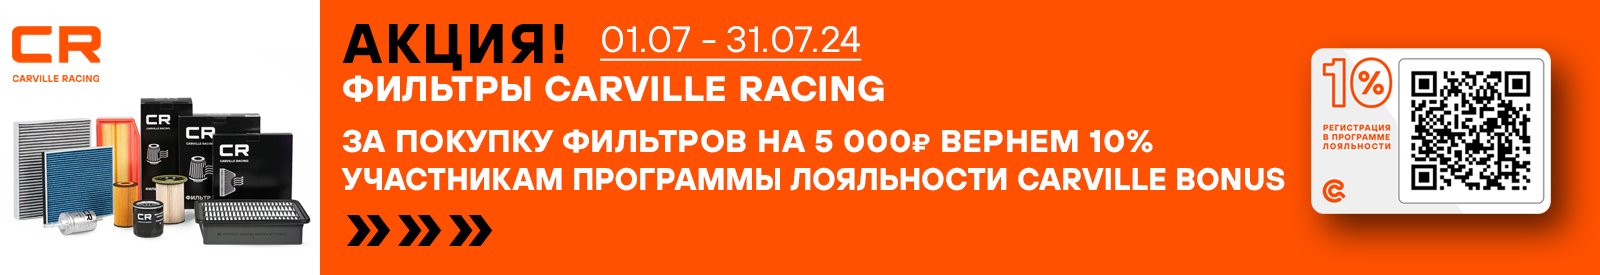 АКЦИЯ CARVILLE RACING